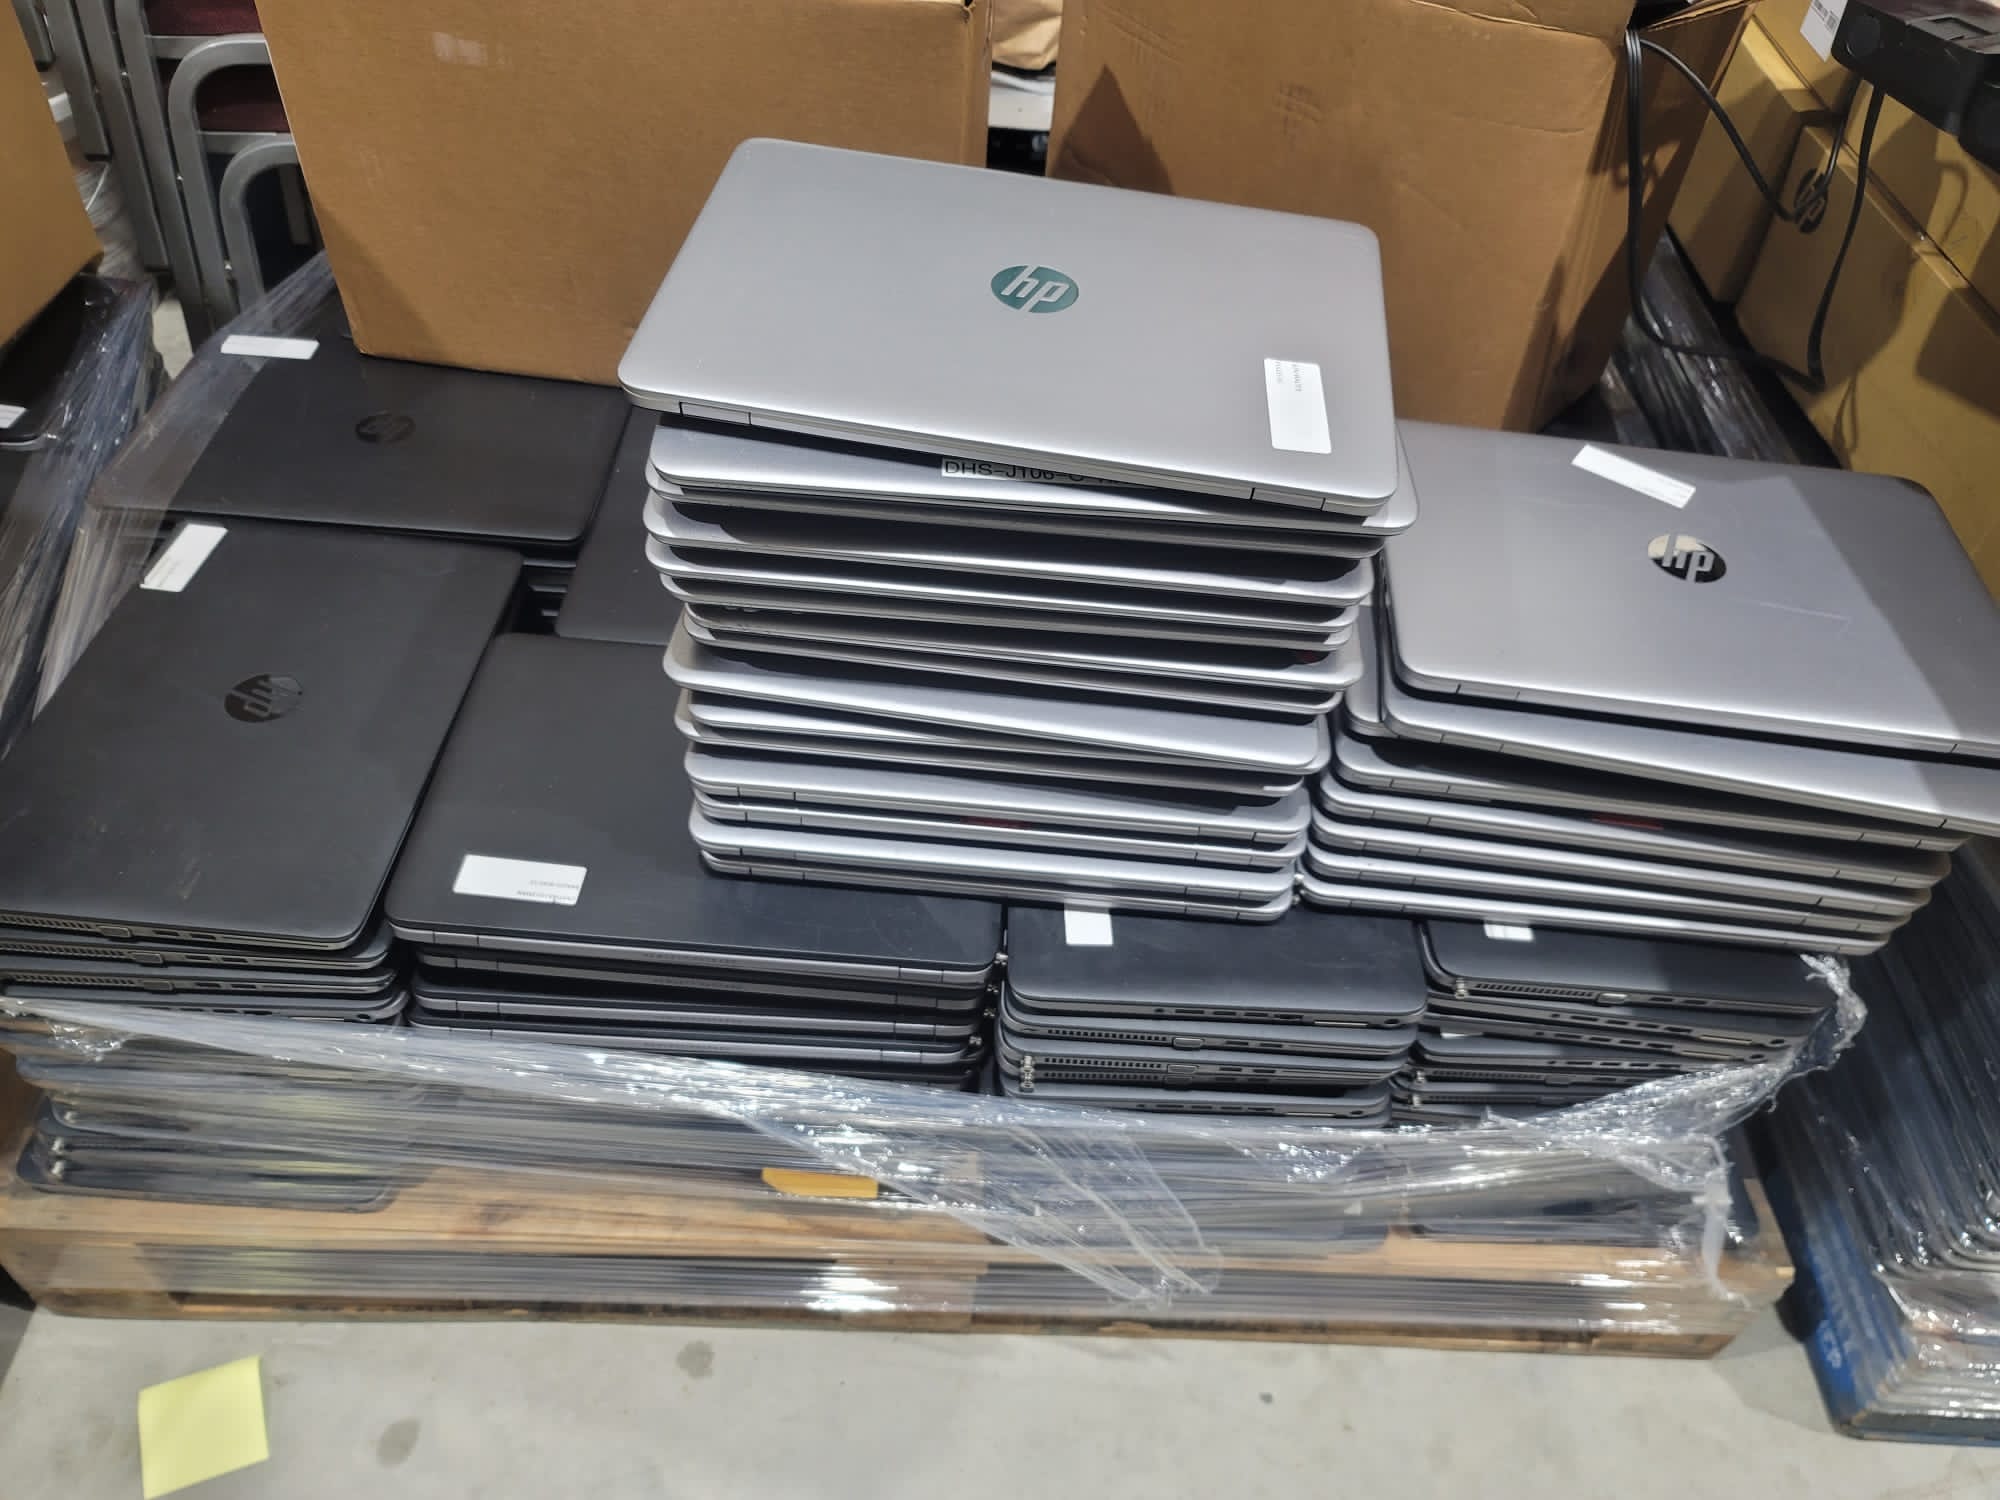 laptop computer recycling in houston